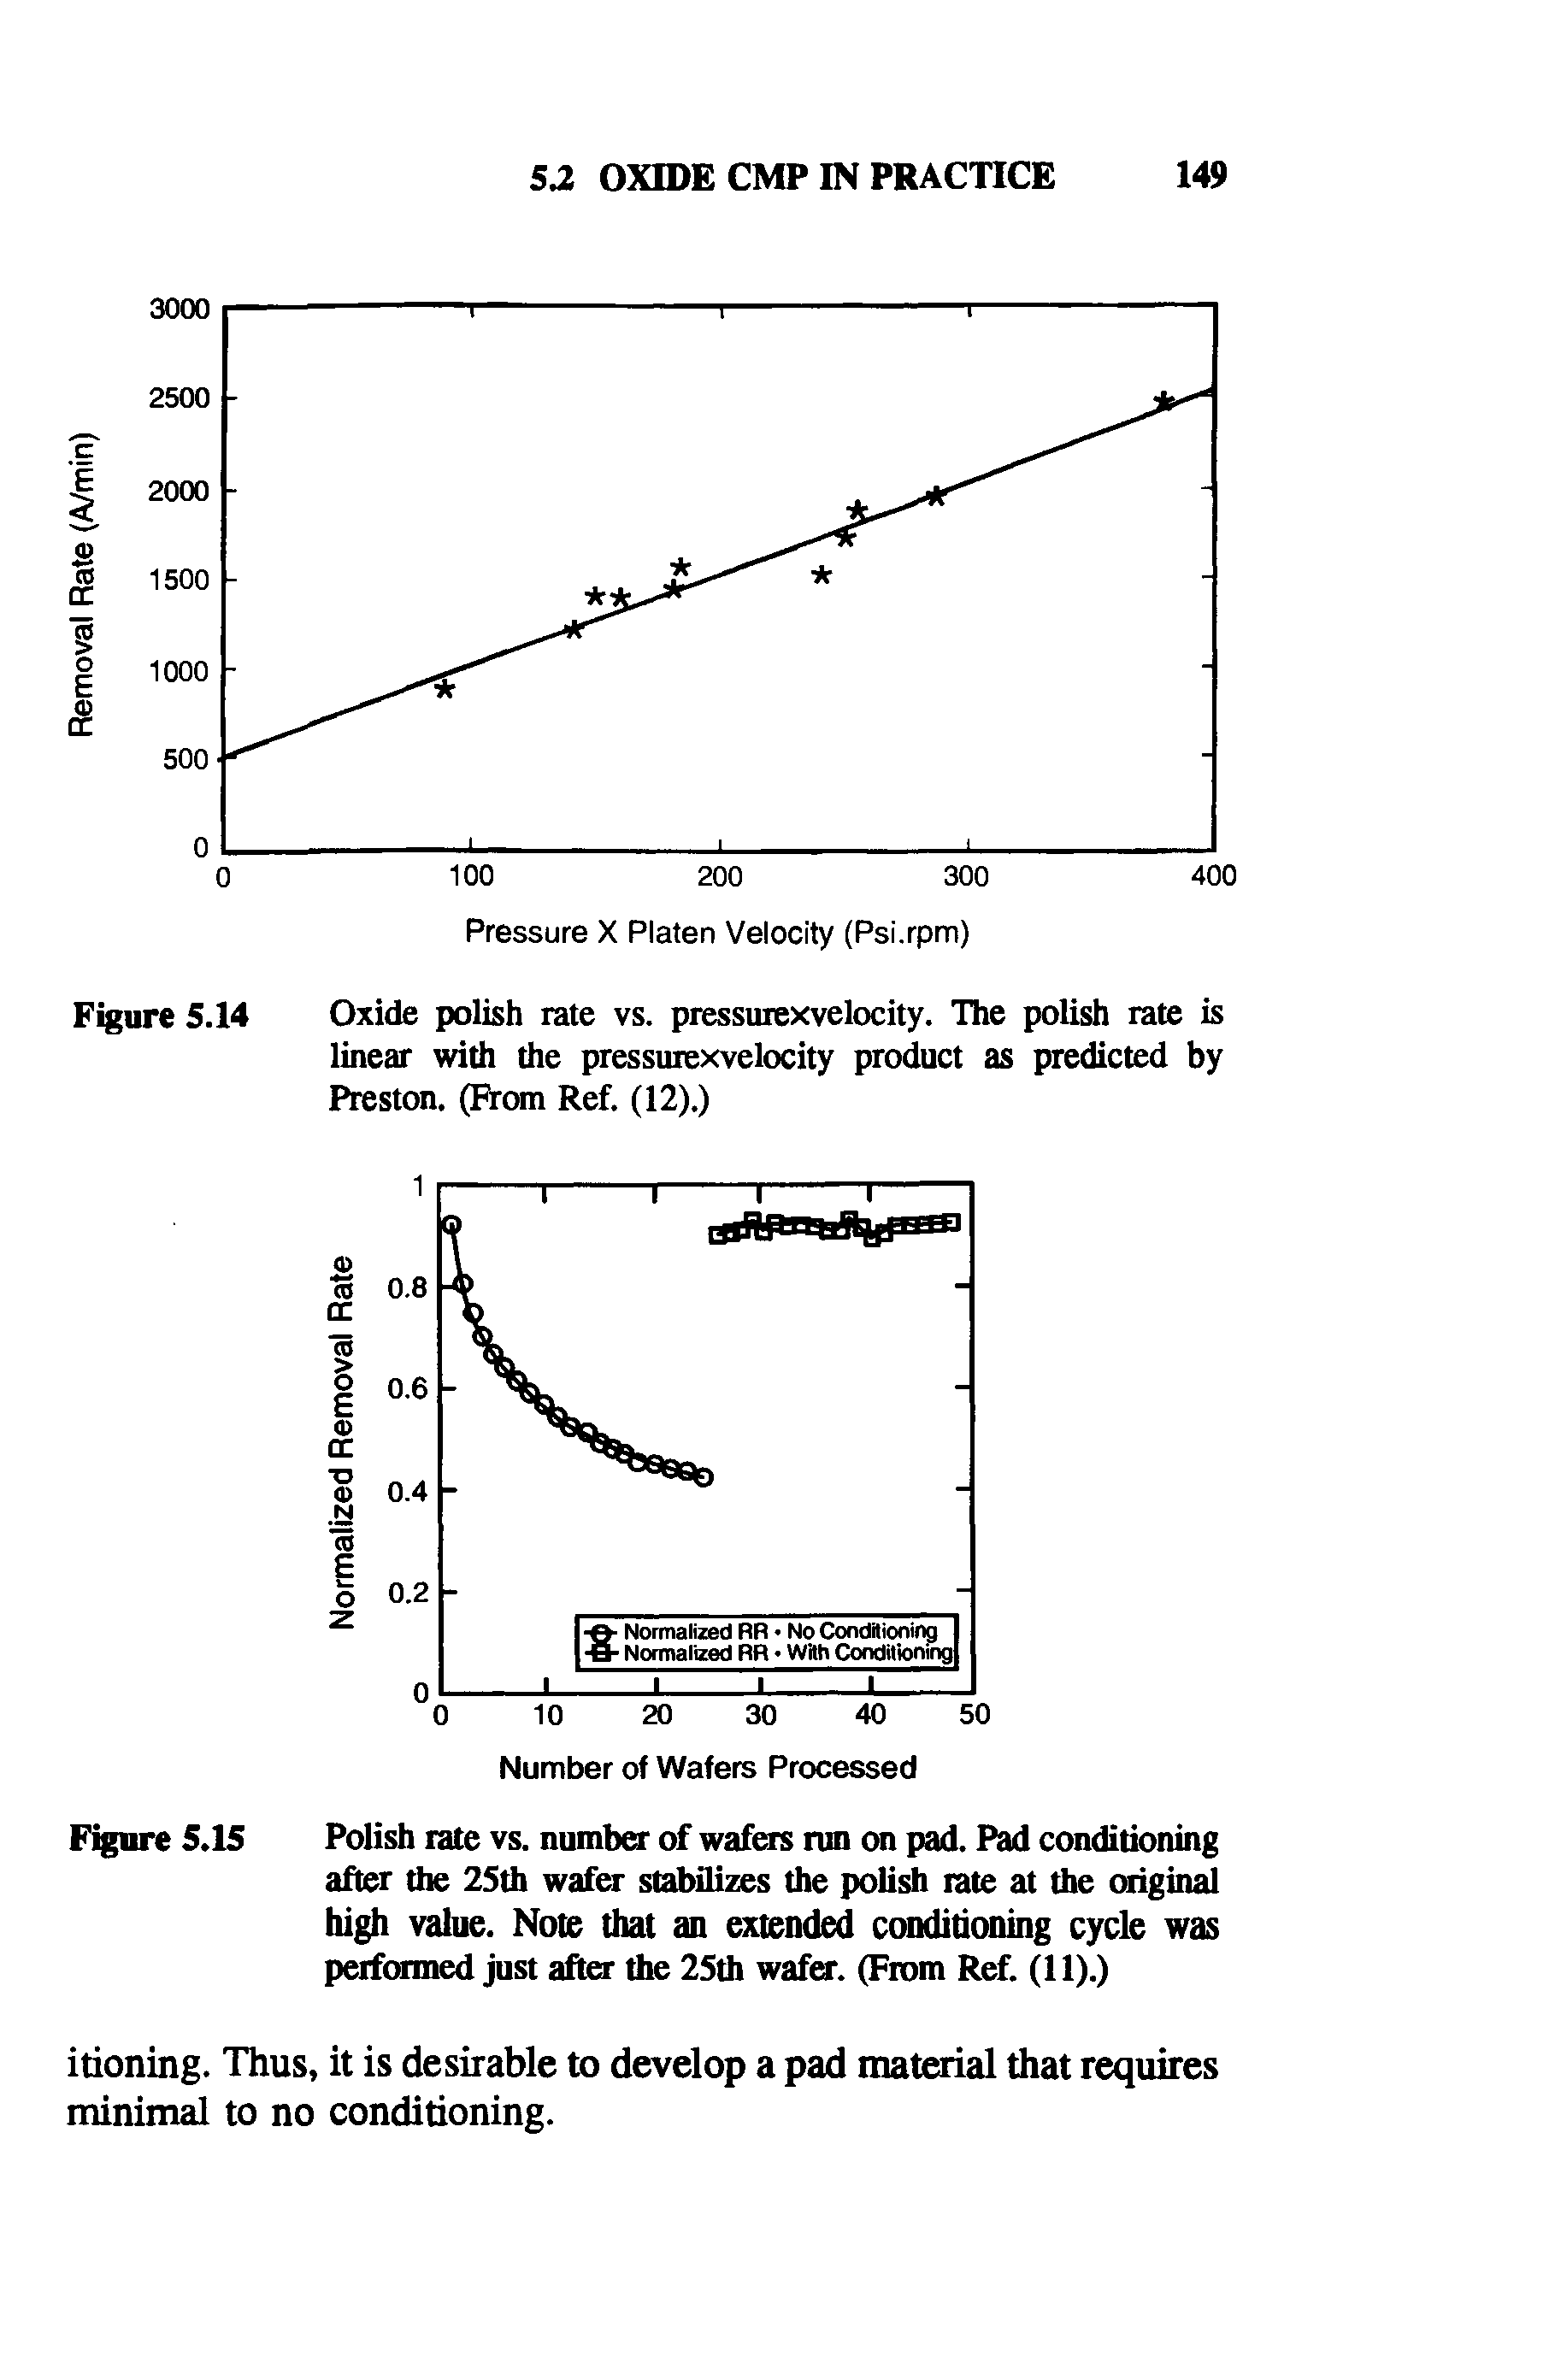 Figure 5.14 Oxide polish rate vs. pressuiexvelocity. The polish rate is linear with the pressuiexvelocity product as predicted by Preston. (From Ref. (12).)...